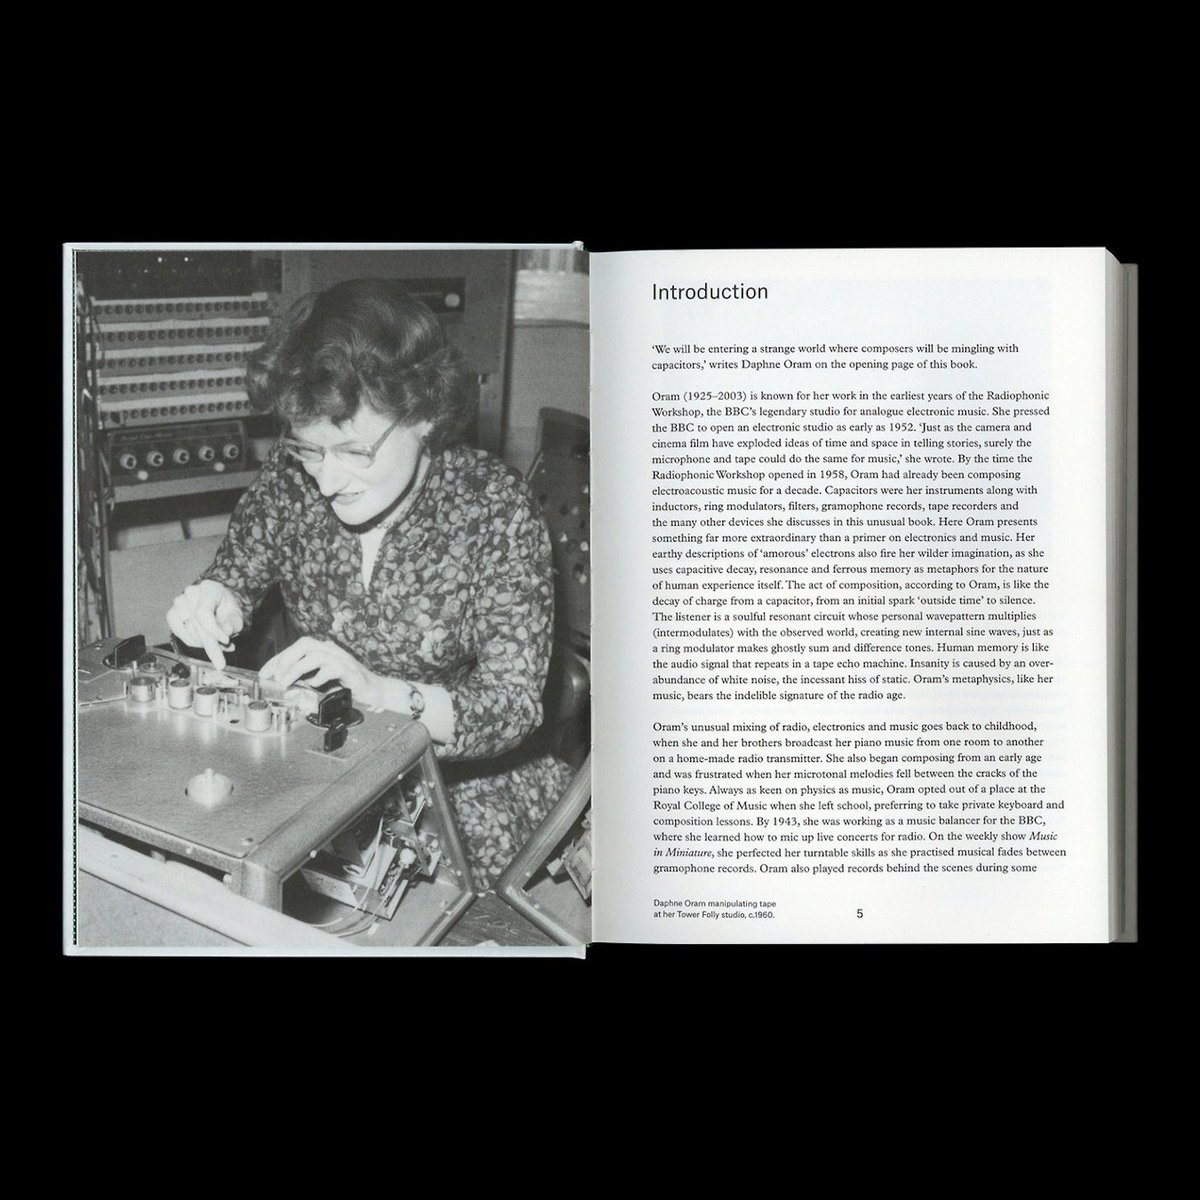 Few copies available of Daphne Oram's AN INDIVIDUAL NOTE OF MUSIC, SOUND AND ELECTRONICS up on our website and Bandcamp: oramawards.bandcamp.com Introduction by @sarah_angliss Published by @daphneoram and Anomie Academic